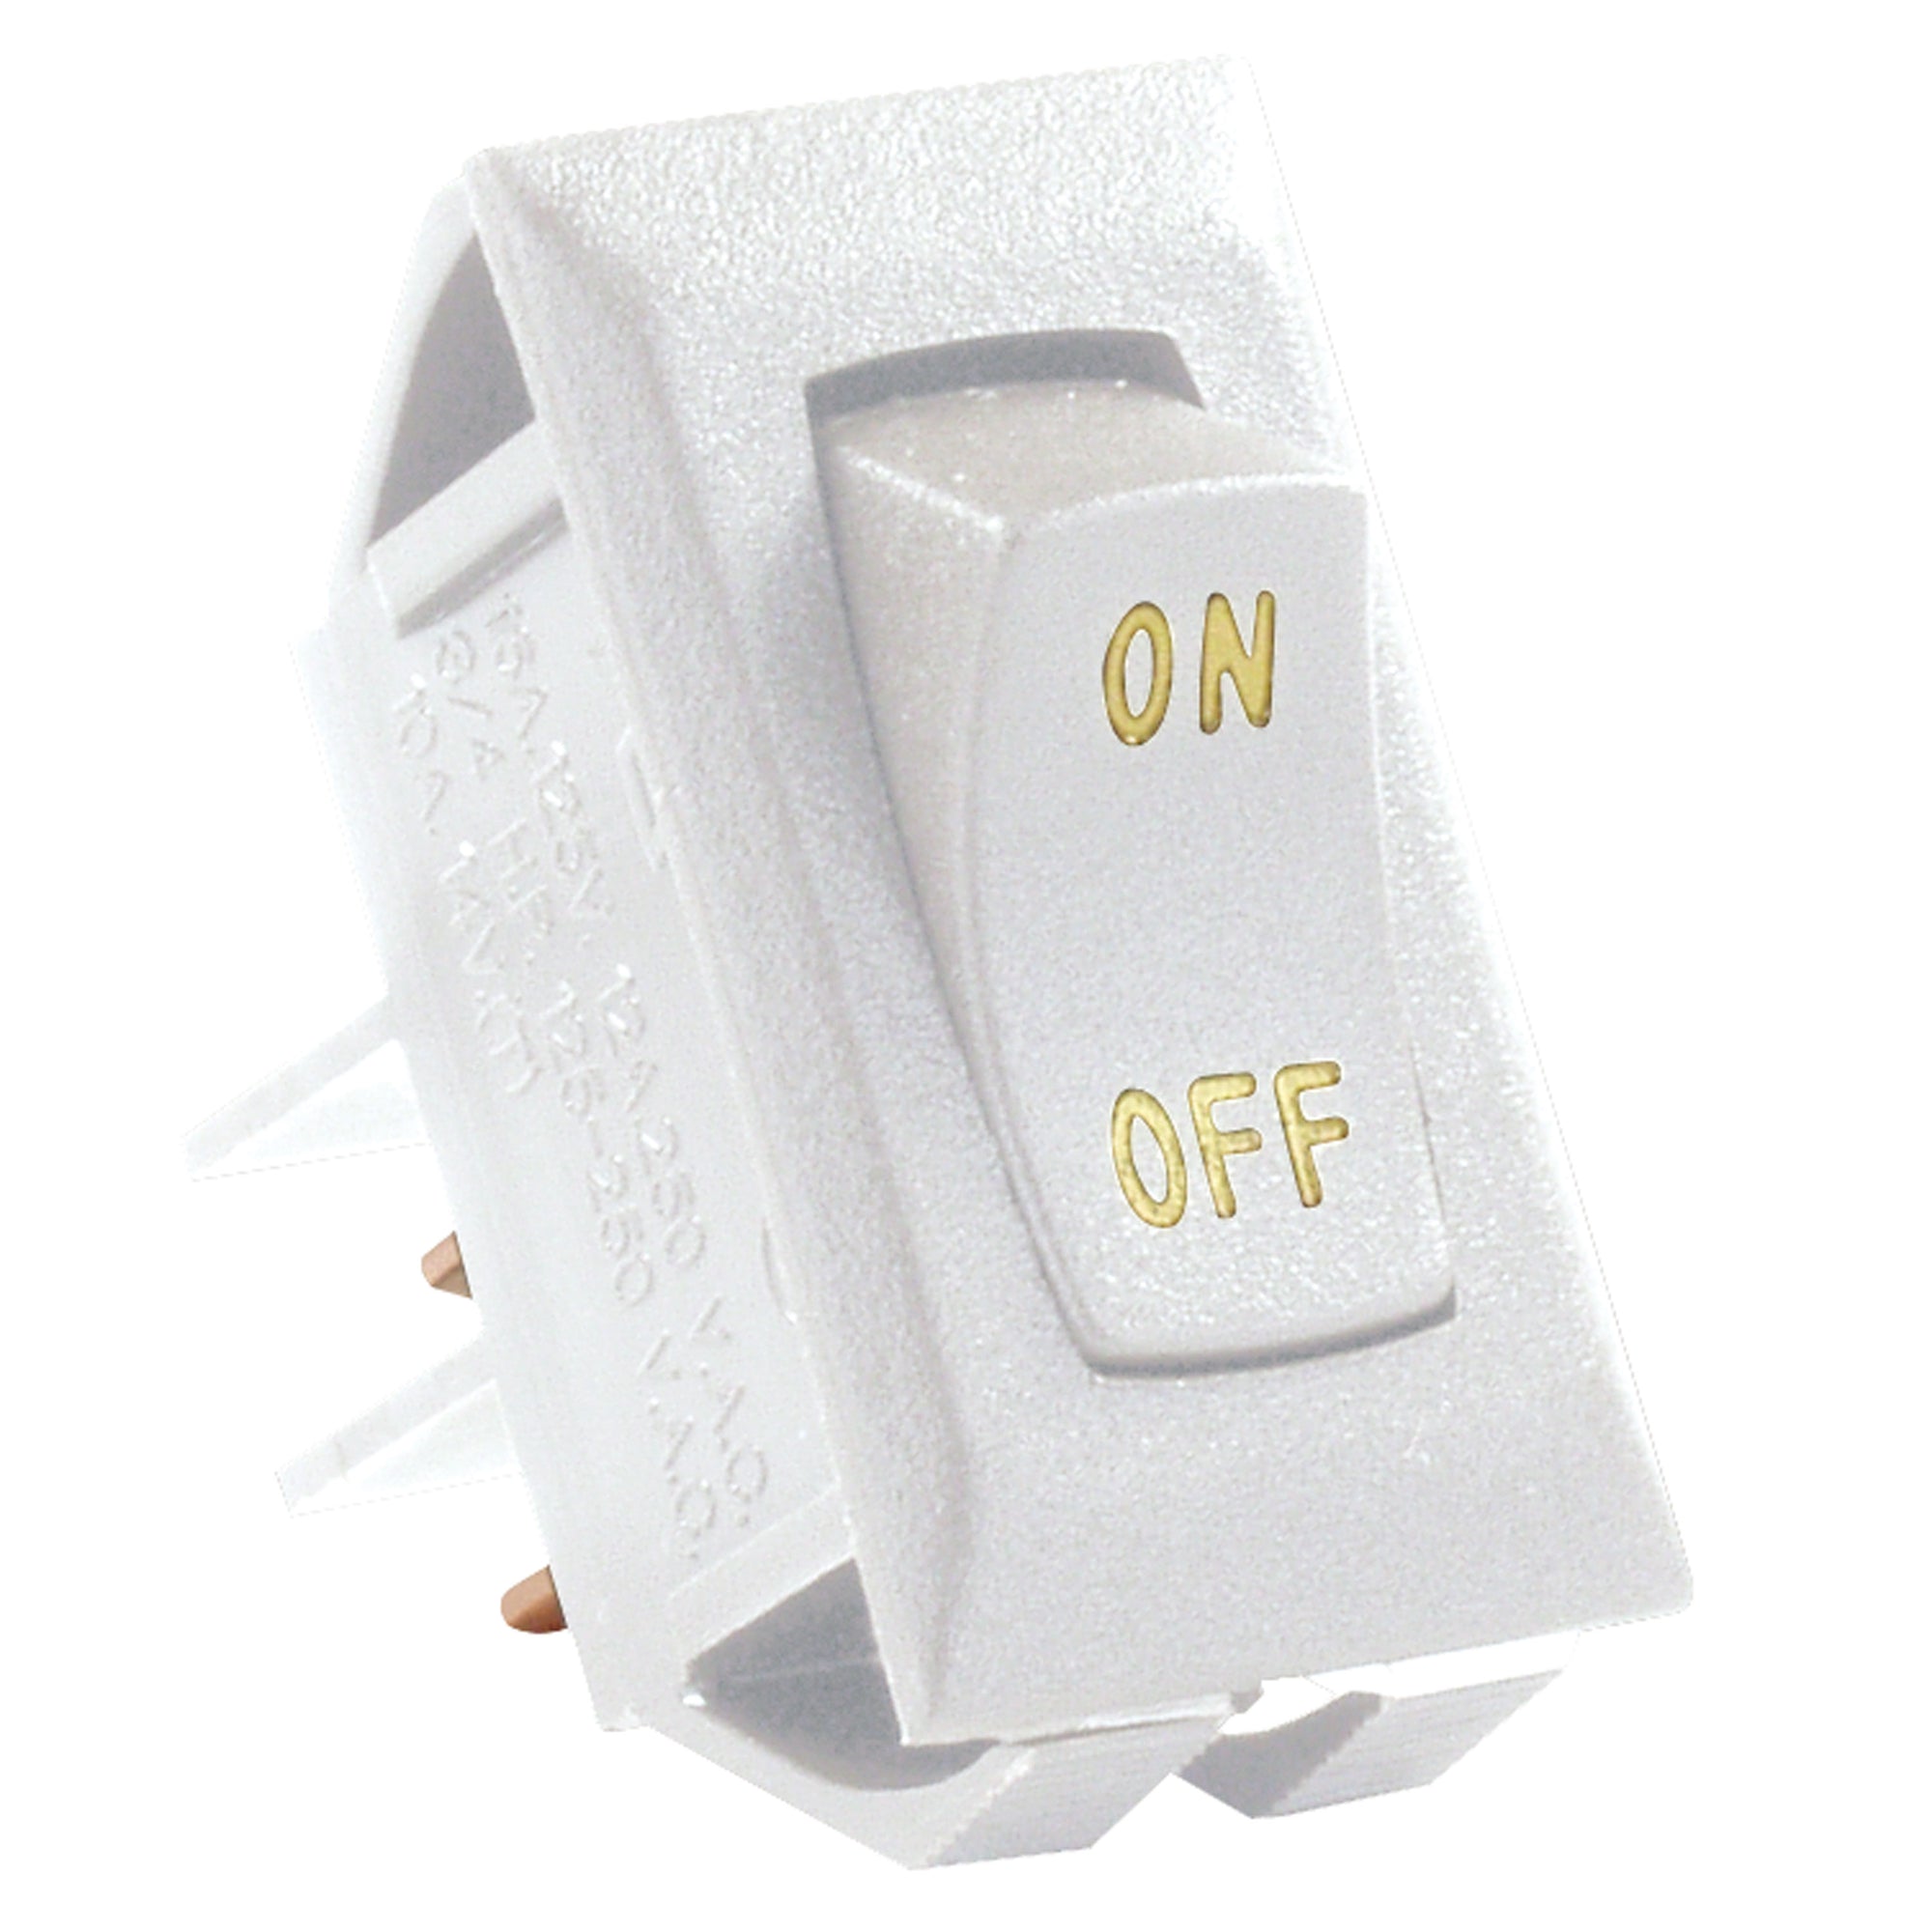 JR Products 12581-5 Labeled On/Off Switches, Pack of 5 - White